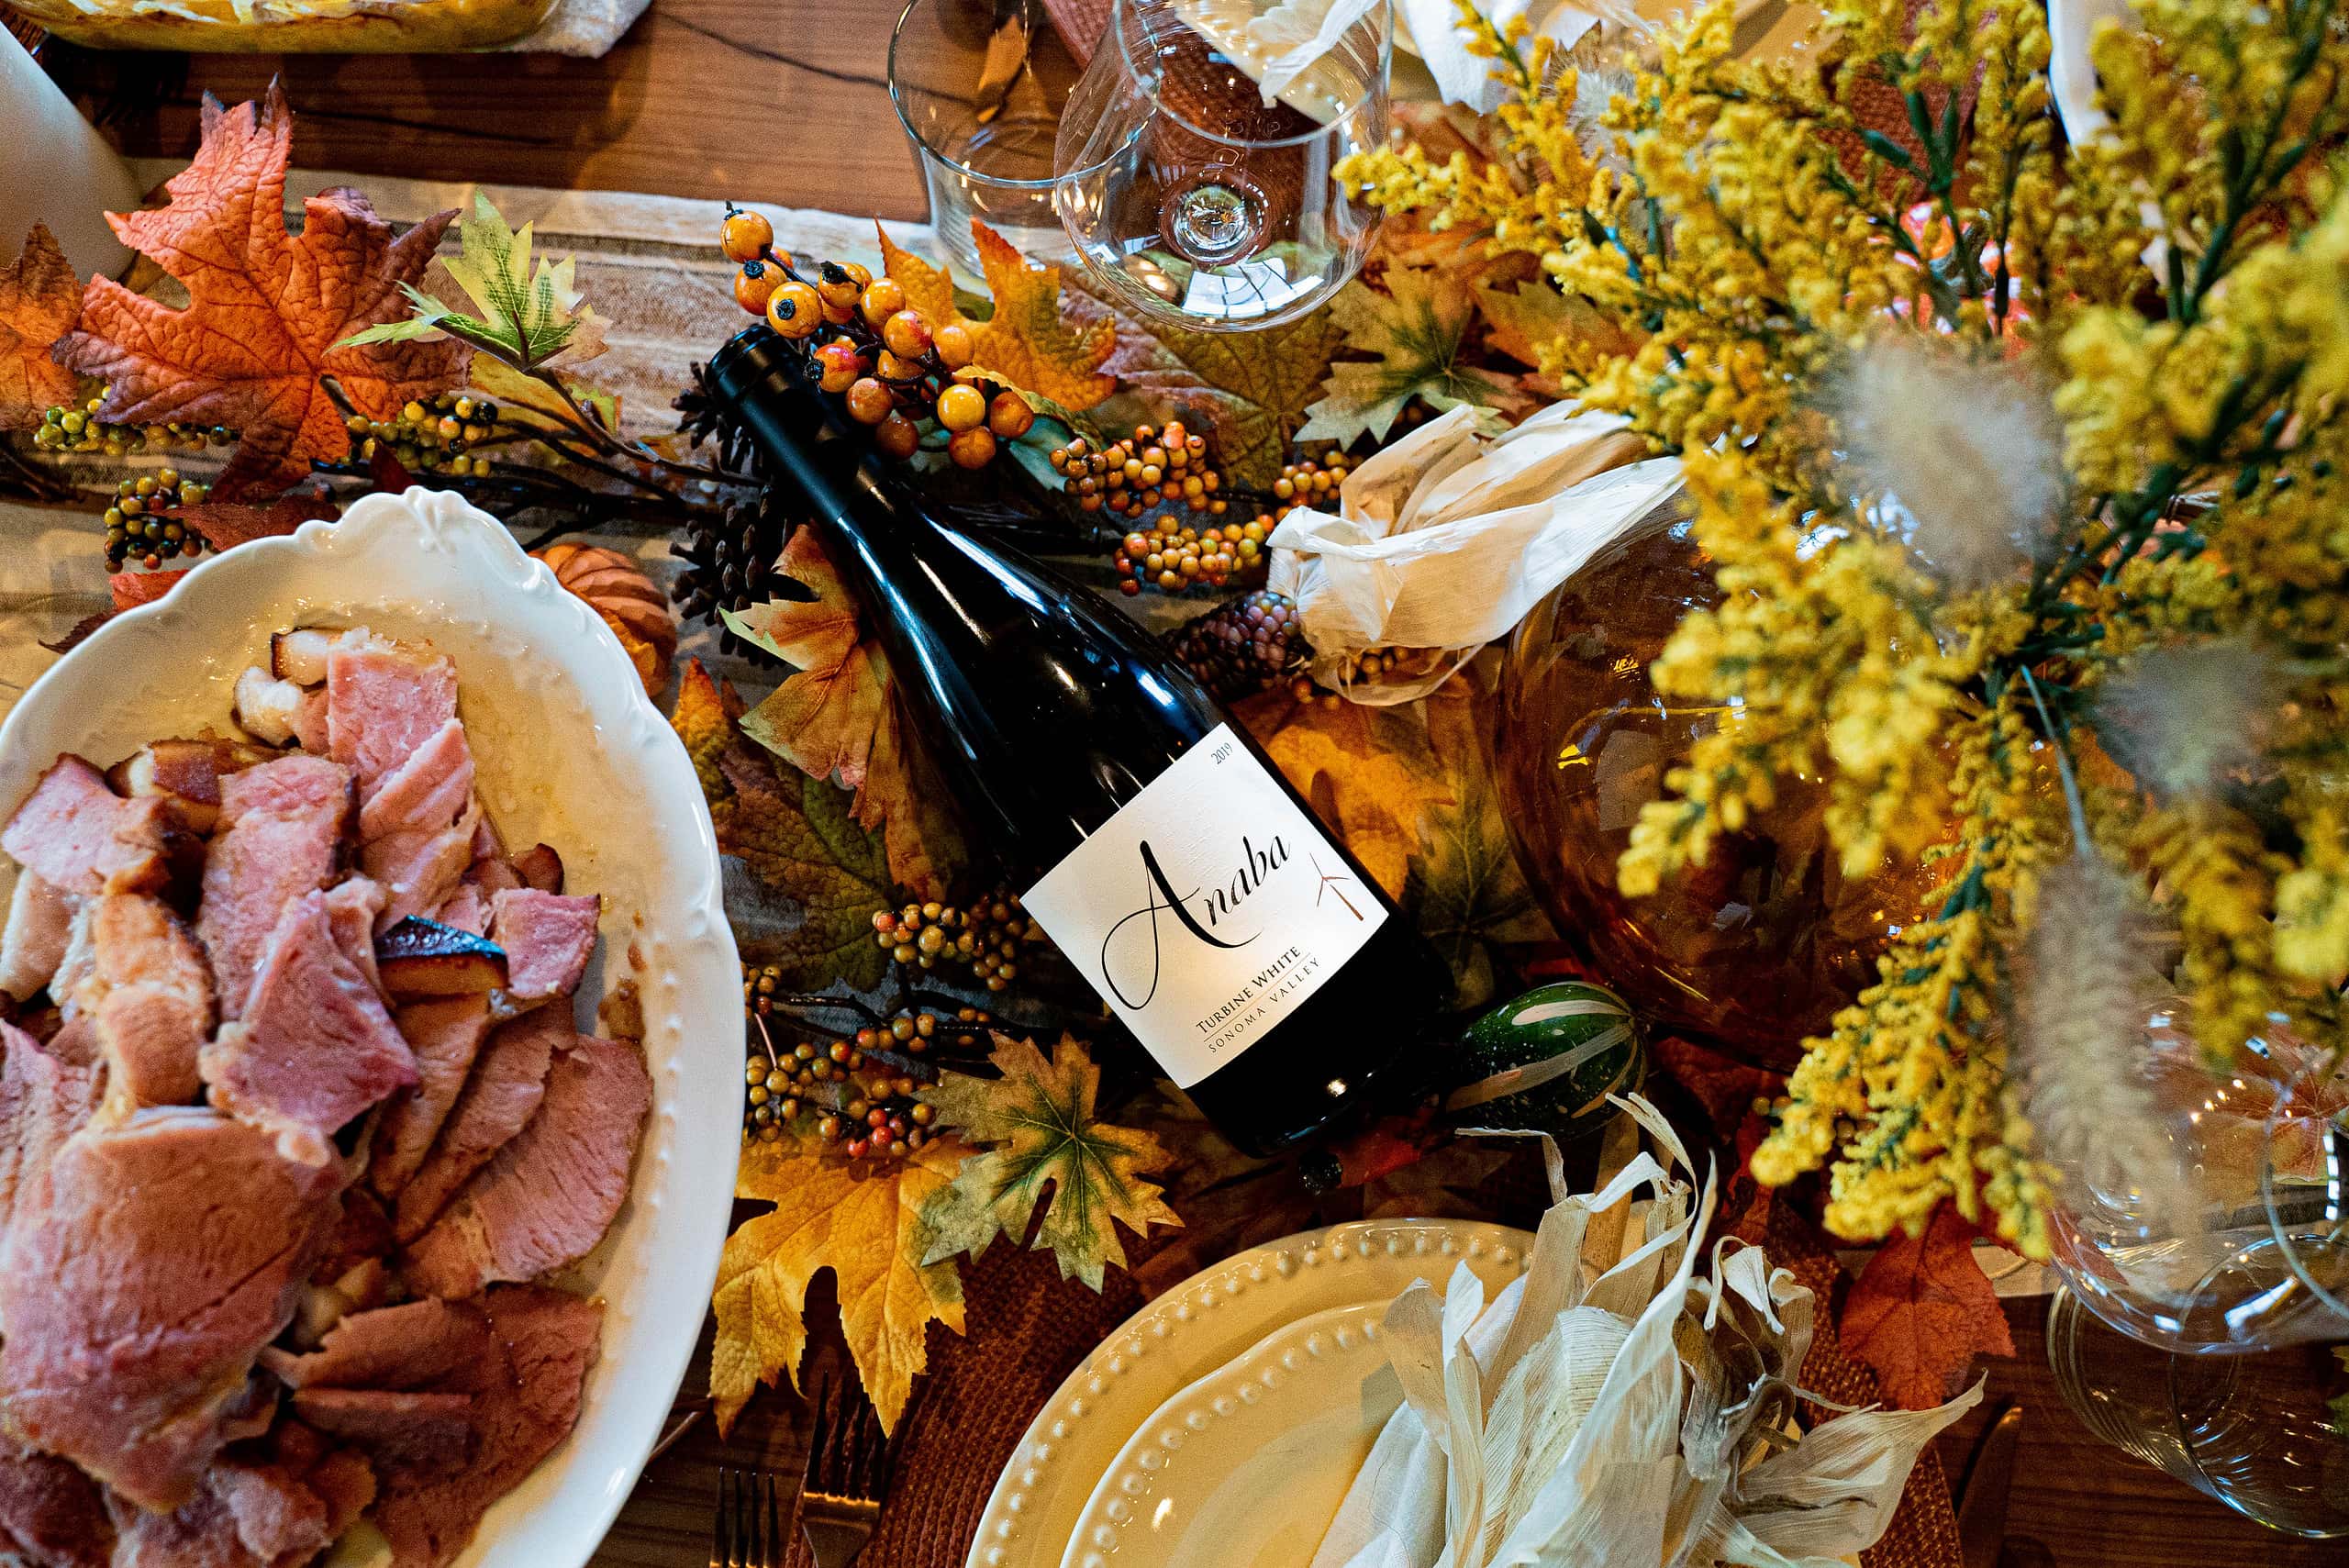 A thanksgiving dinner table is decorated with fall leaves and flowers, with a platter of ham, a bottle of Anaba's Turbine White is in the middle.